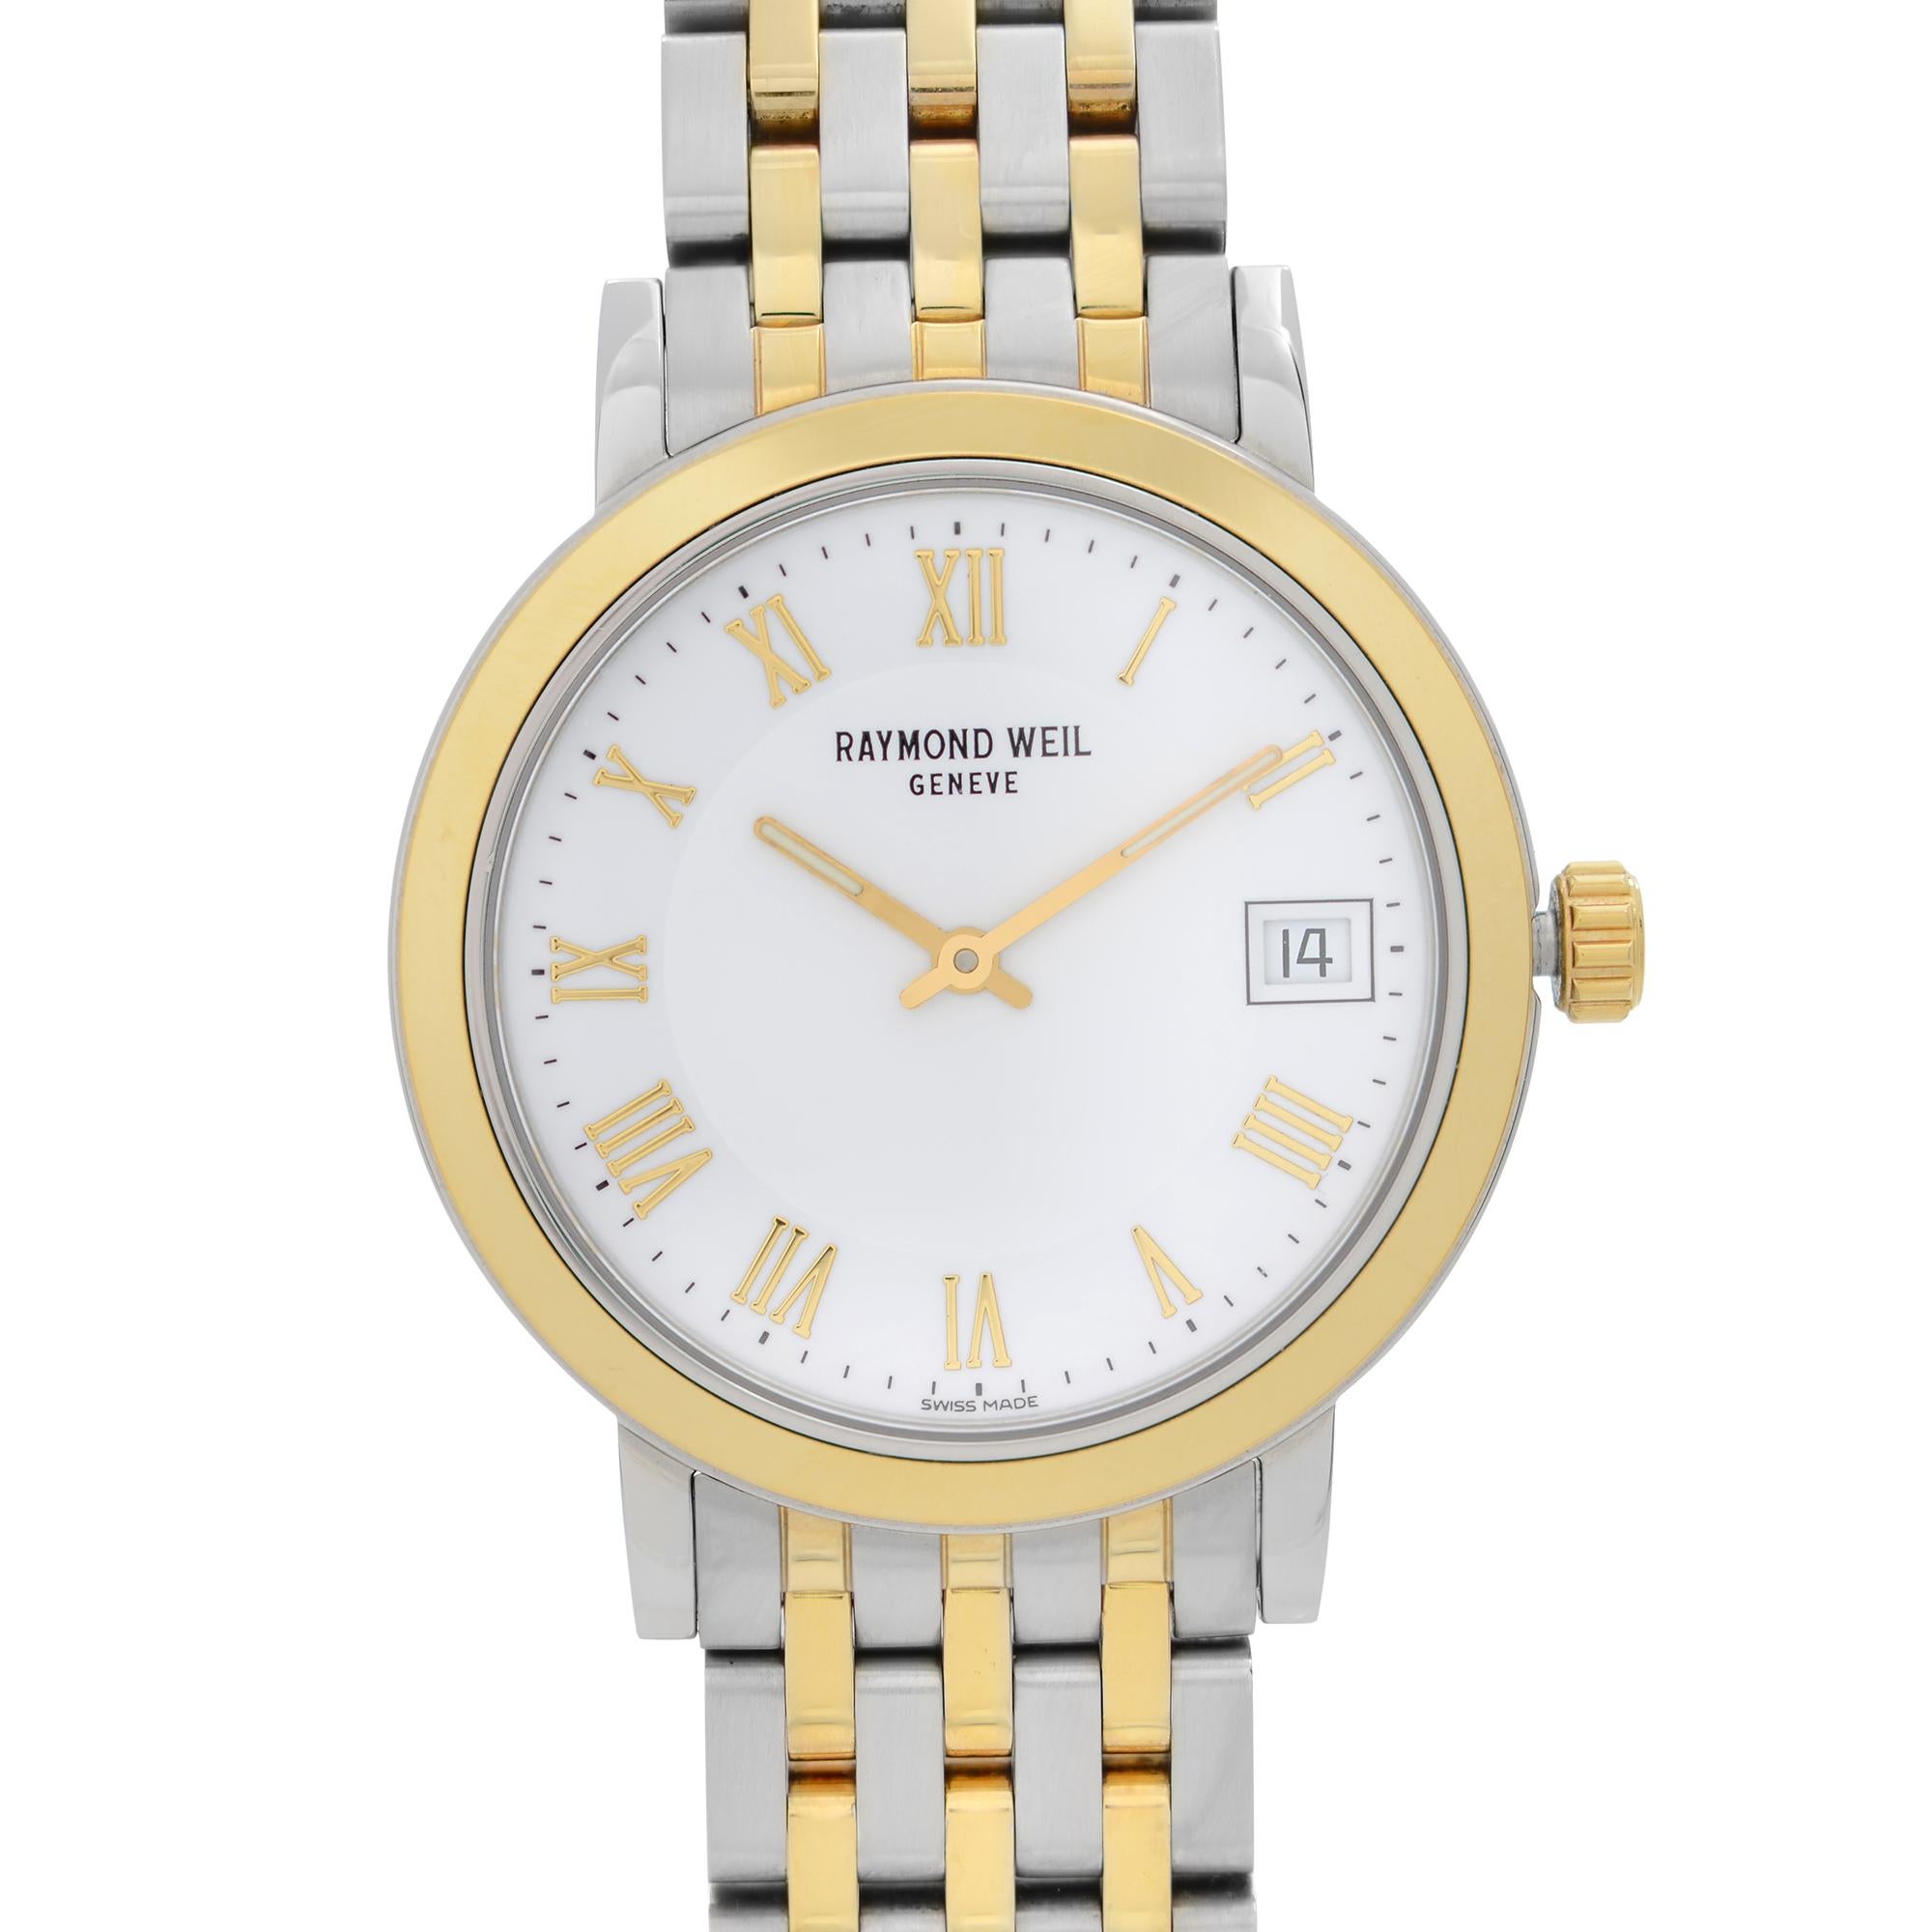 Pre-owned Raymond Weil Toccata Two-Tone Steel White Roman Dial Ladies Watch 5593-STP-00308. The Watch Has Water Damage on Hands as Visible on Side Pictures, as well as Minor Scratches on the Bezel, Bracelet, and Caseback. Original Box and Papers are